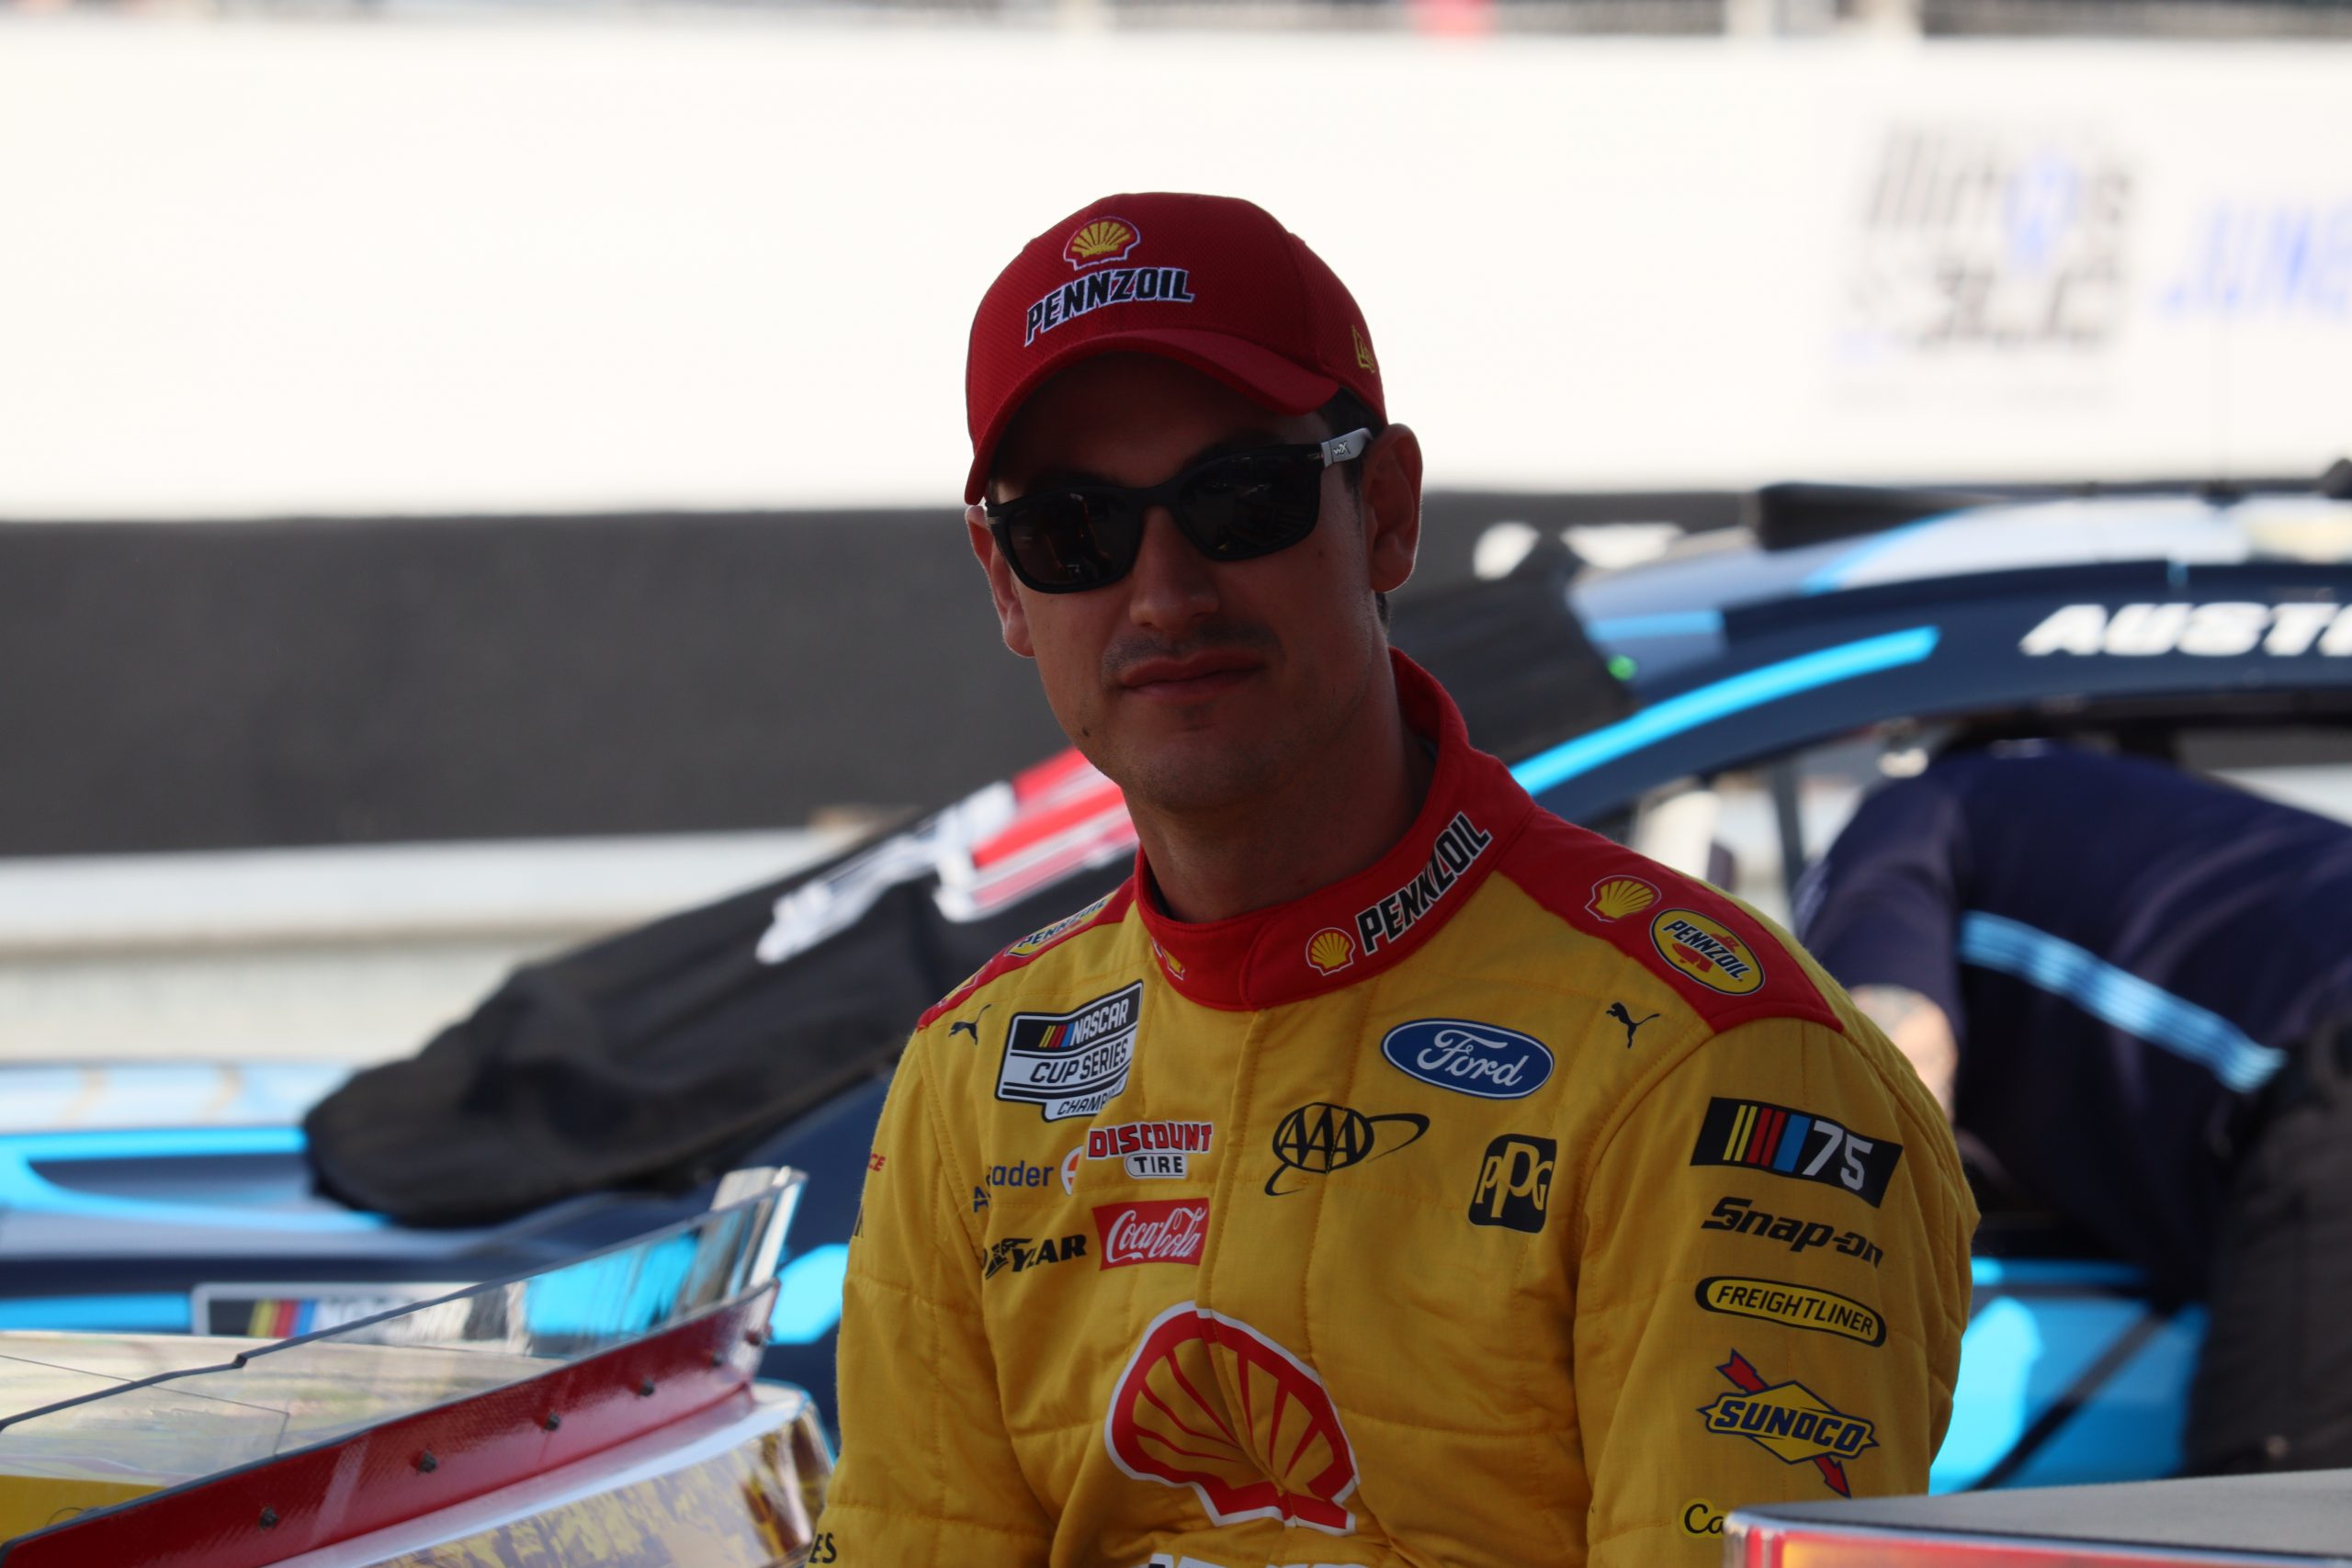 Joey Logano focuses intently on winning his second race of the 2023 NASCAR Cup Series season. (Photo: Bobby Krug | The Podium Finish)